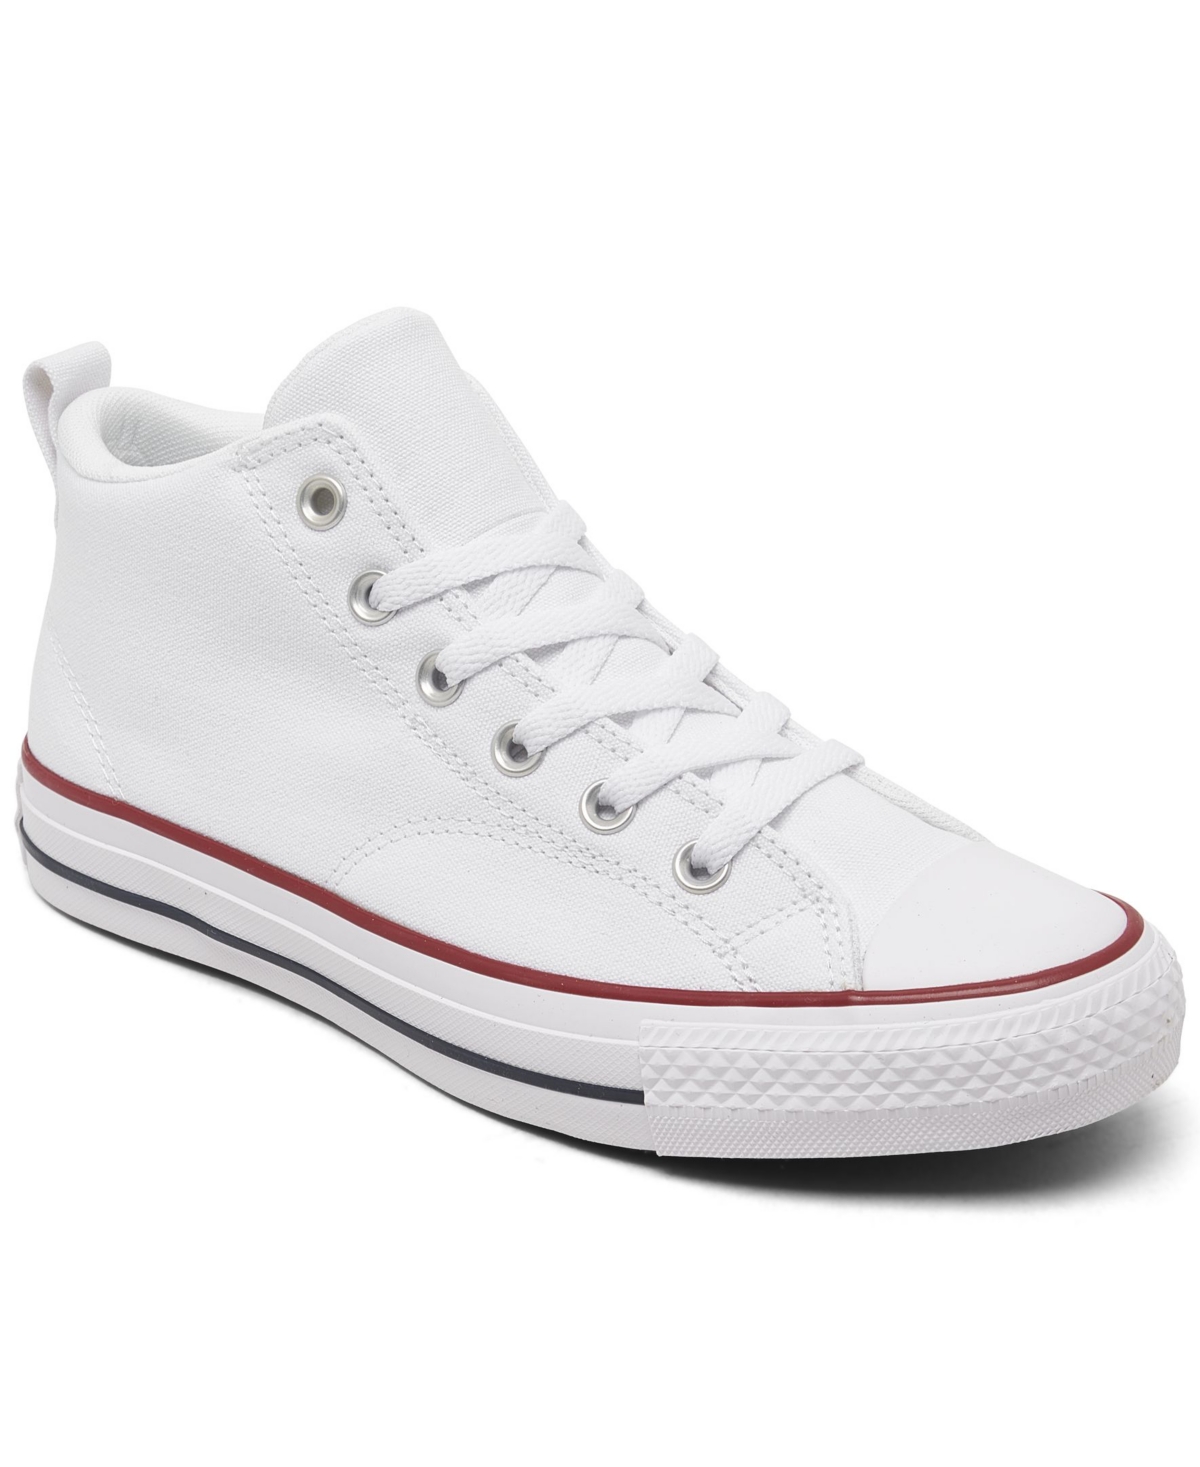 Converse Big Kids Chuck Taylor All Star Malden Street Casual Sneakers From Finish Line In White,red,blue